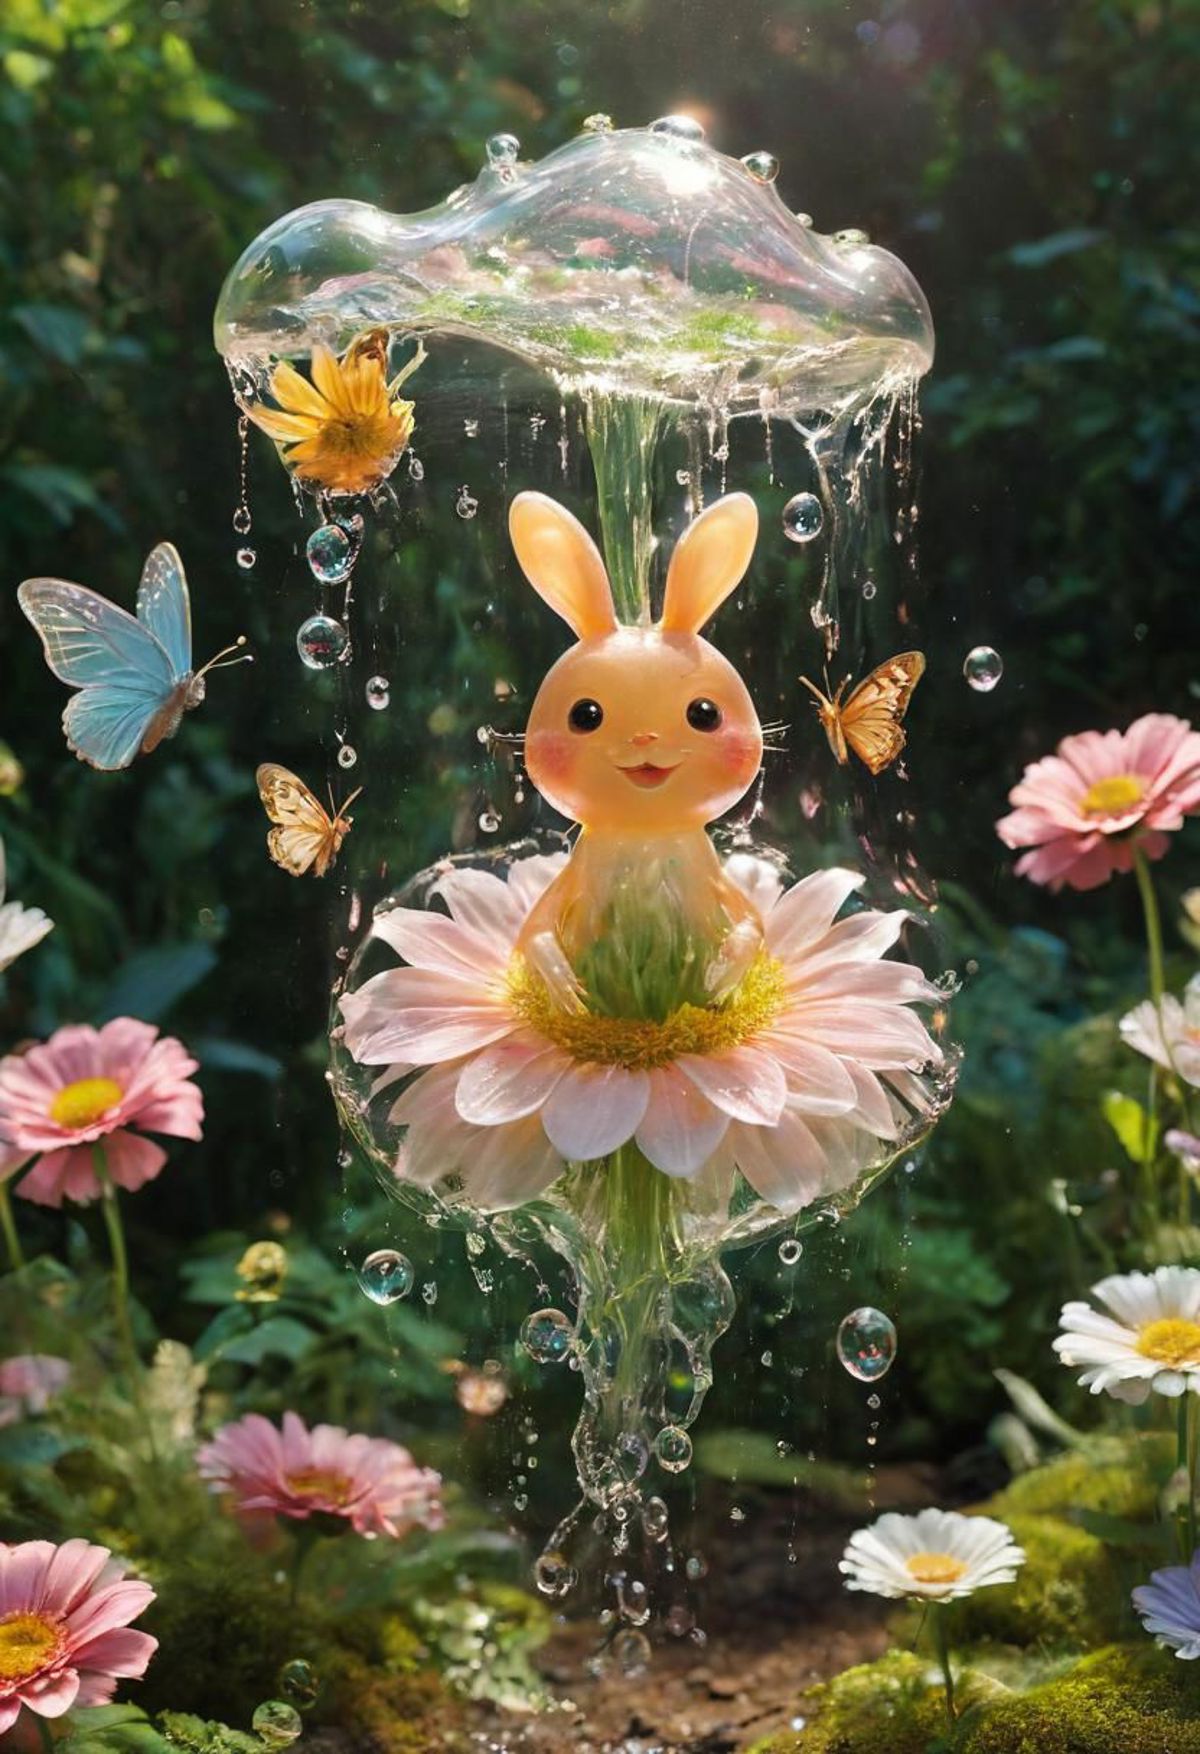 A Rabbit Figurine Sitting in a Flower Garden with Butterflies and Bubbles